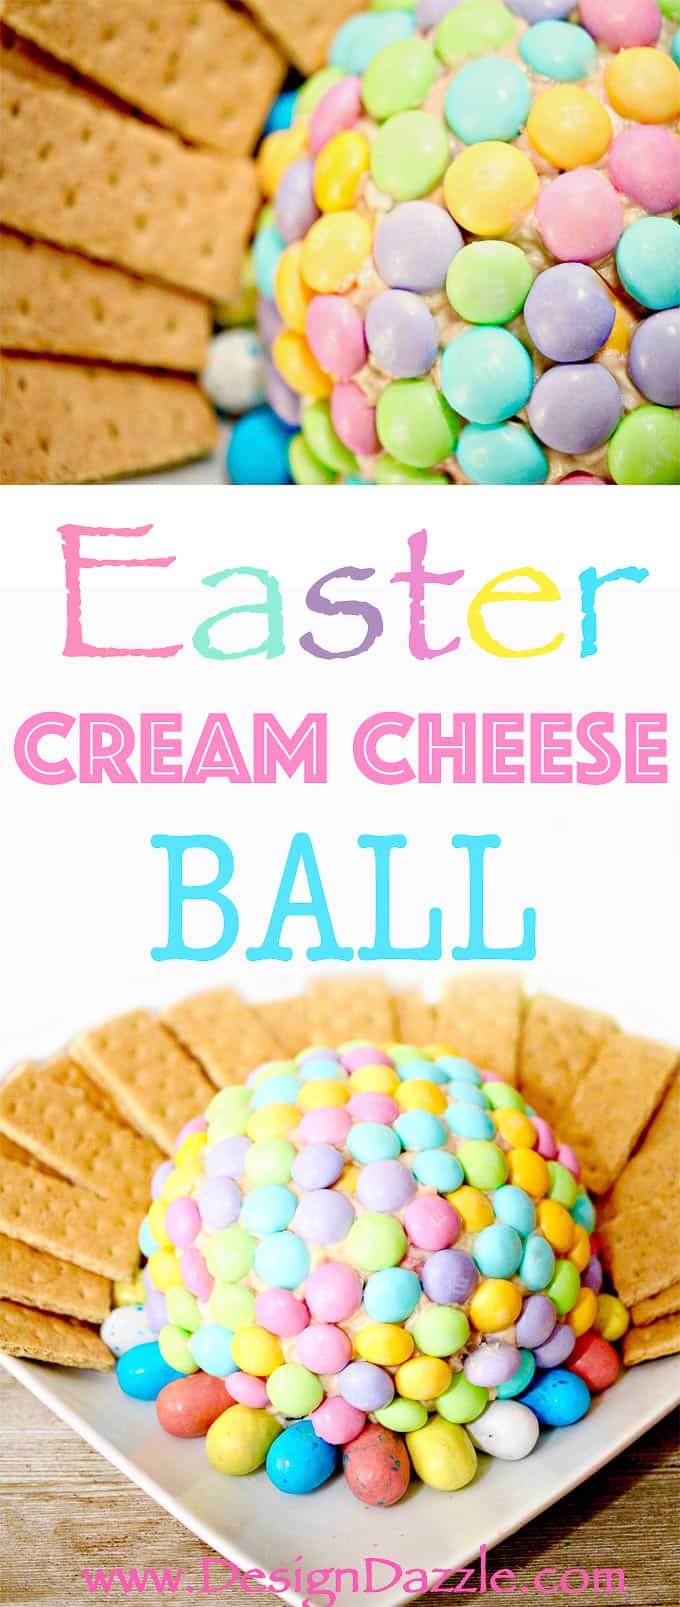 If you are a fan of cream cheese (who isn't?) and chocolate then you will love this decadent treat! Find the recipe and instructions to this delicious Easter Cream Cheese Ball below! | Design Dazzle